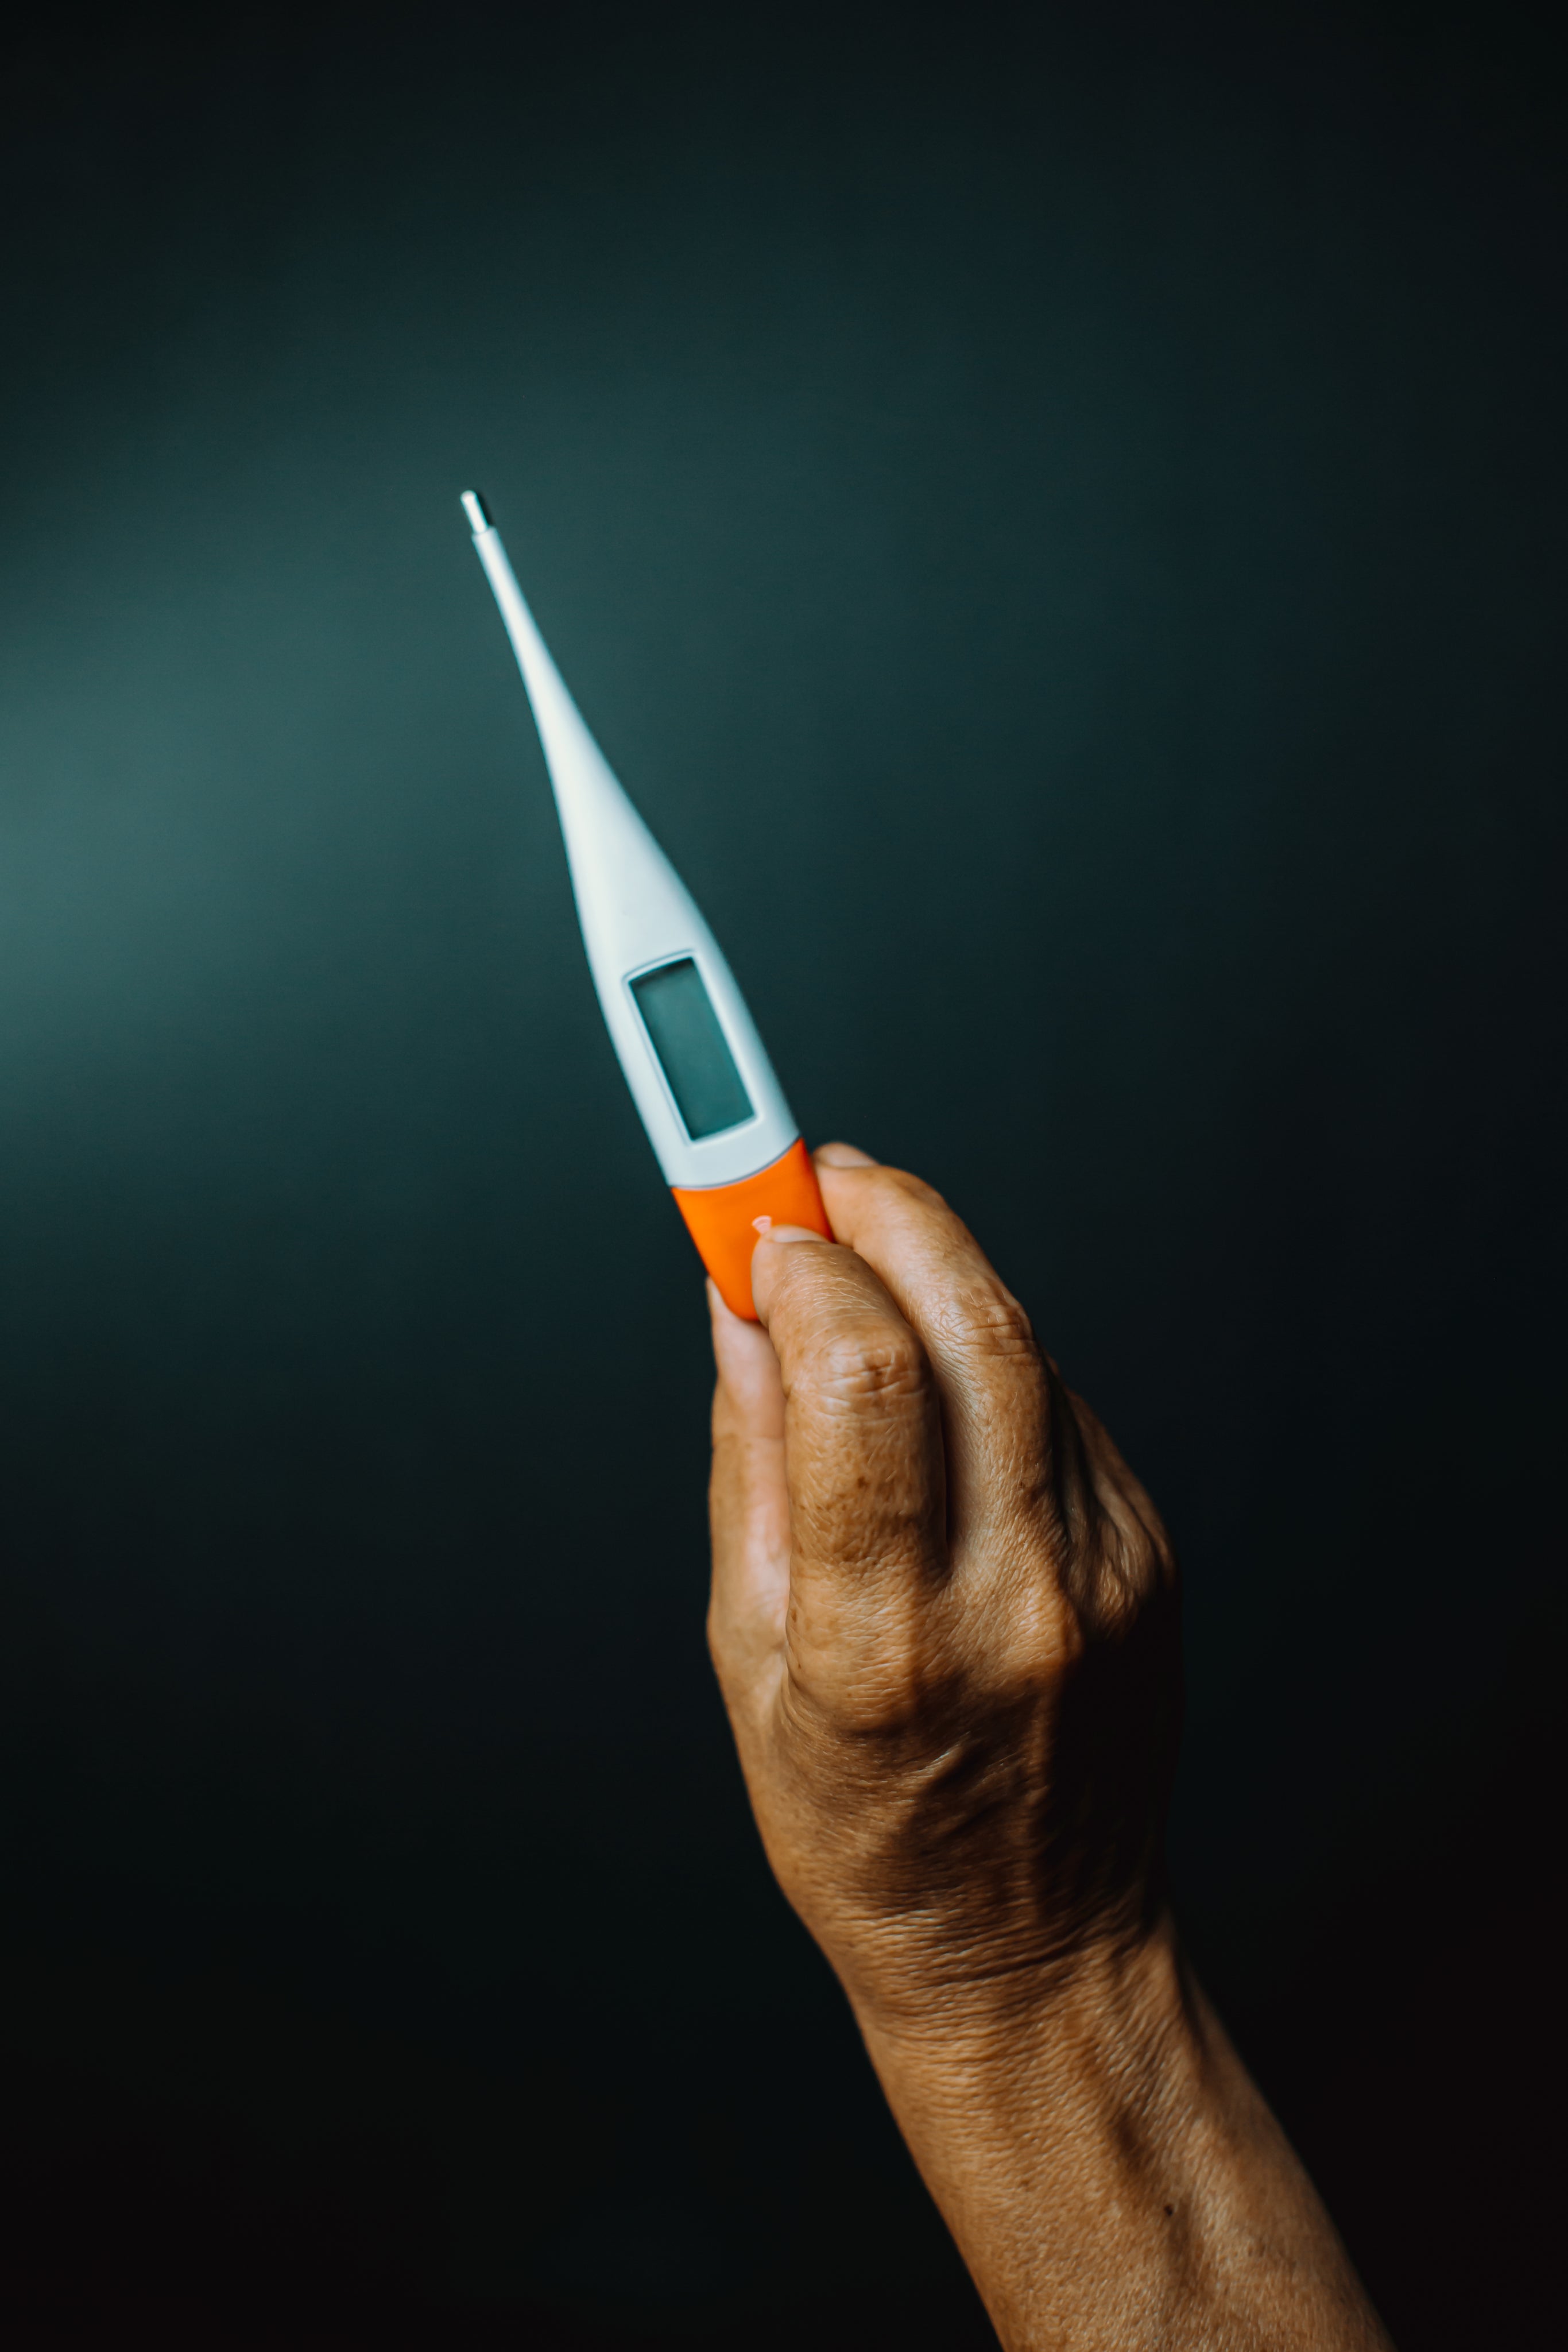 A-HAND-HOLDS-UP-A-THERMOMETER-AGAINST-green-BACKGROUND